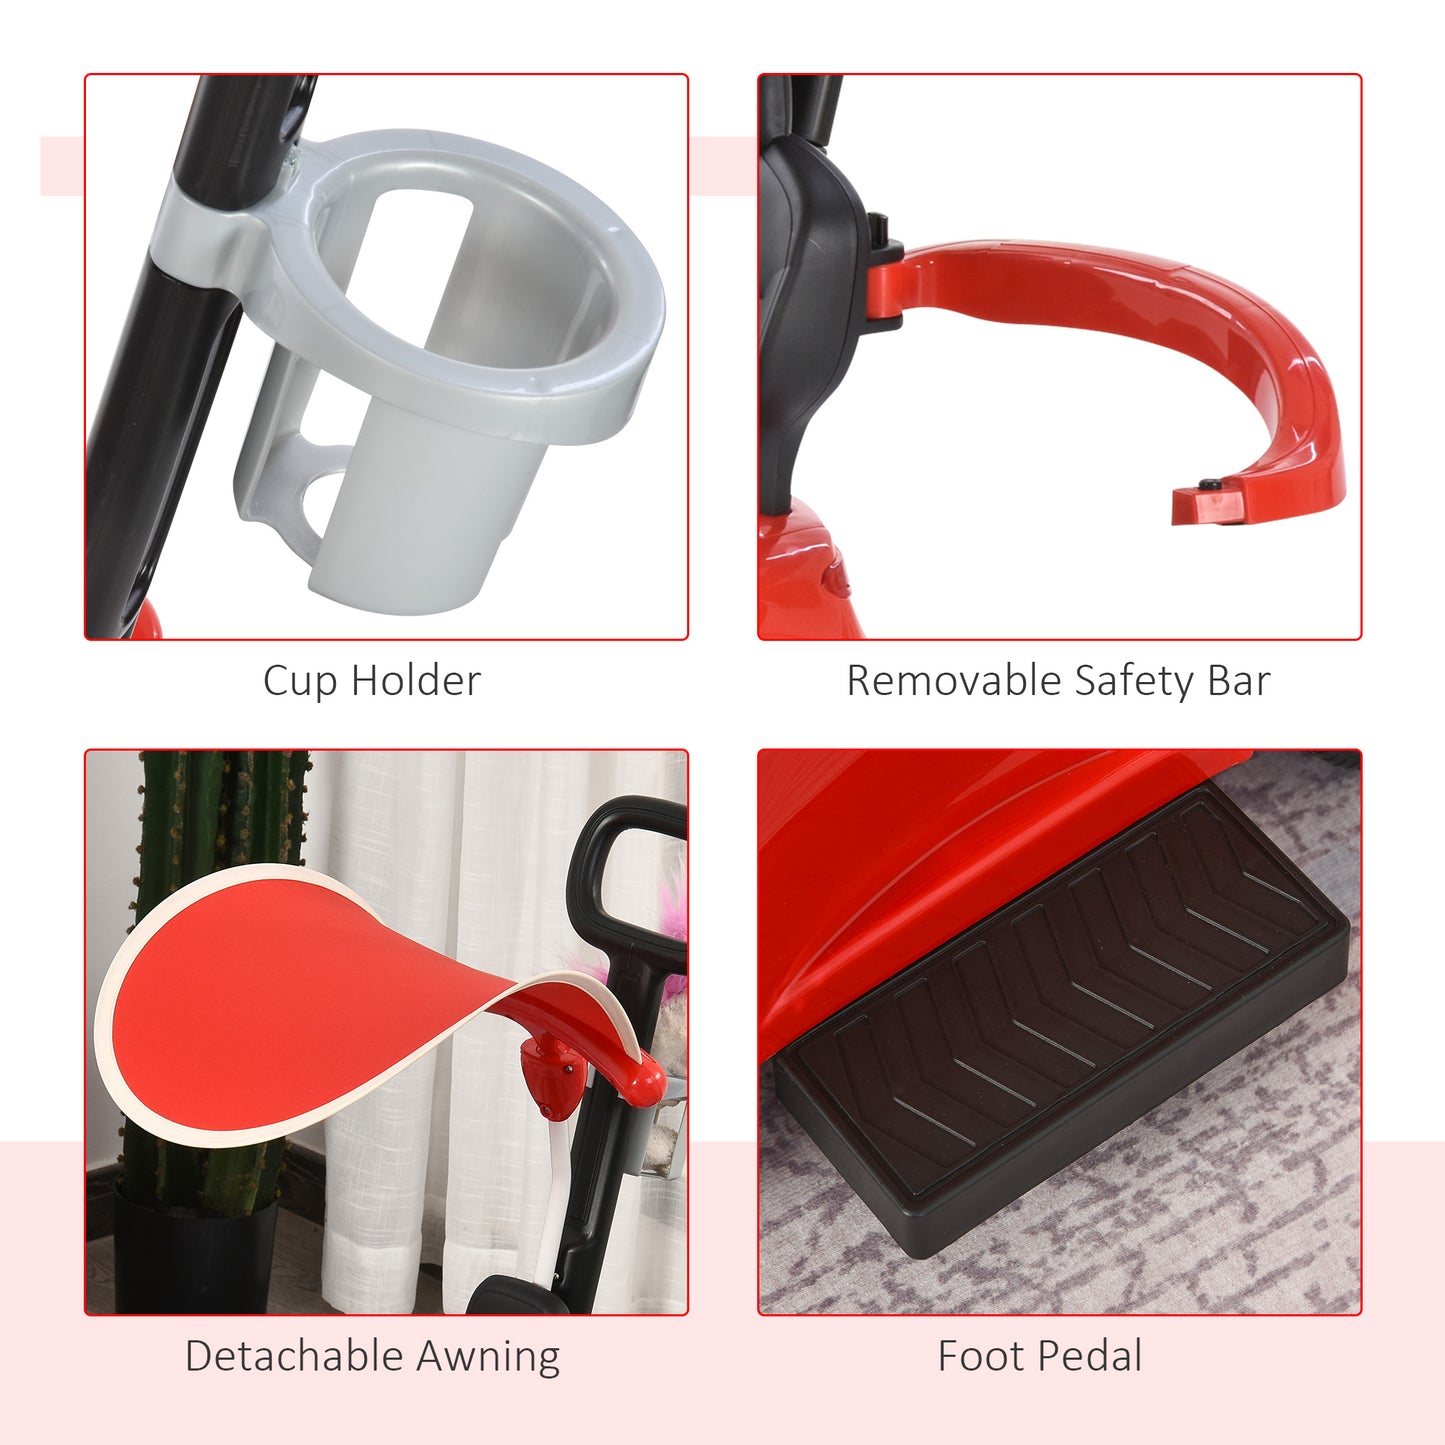 HOMCOM 3 in 1 Ride on Push Along Car Mercedes Benz for Toddlers Stroller Sliding Walking Car with Sun Canopy Horn Sound Safety Bar Cup Holder Ride on Toy for 1-3 Years Old Boy Girl Red